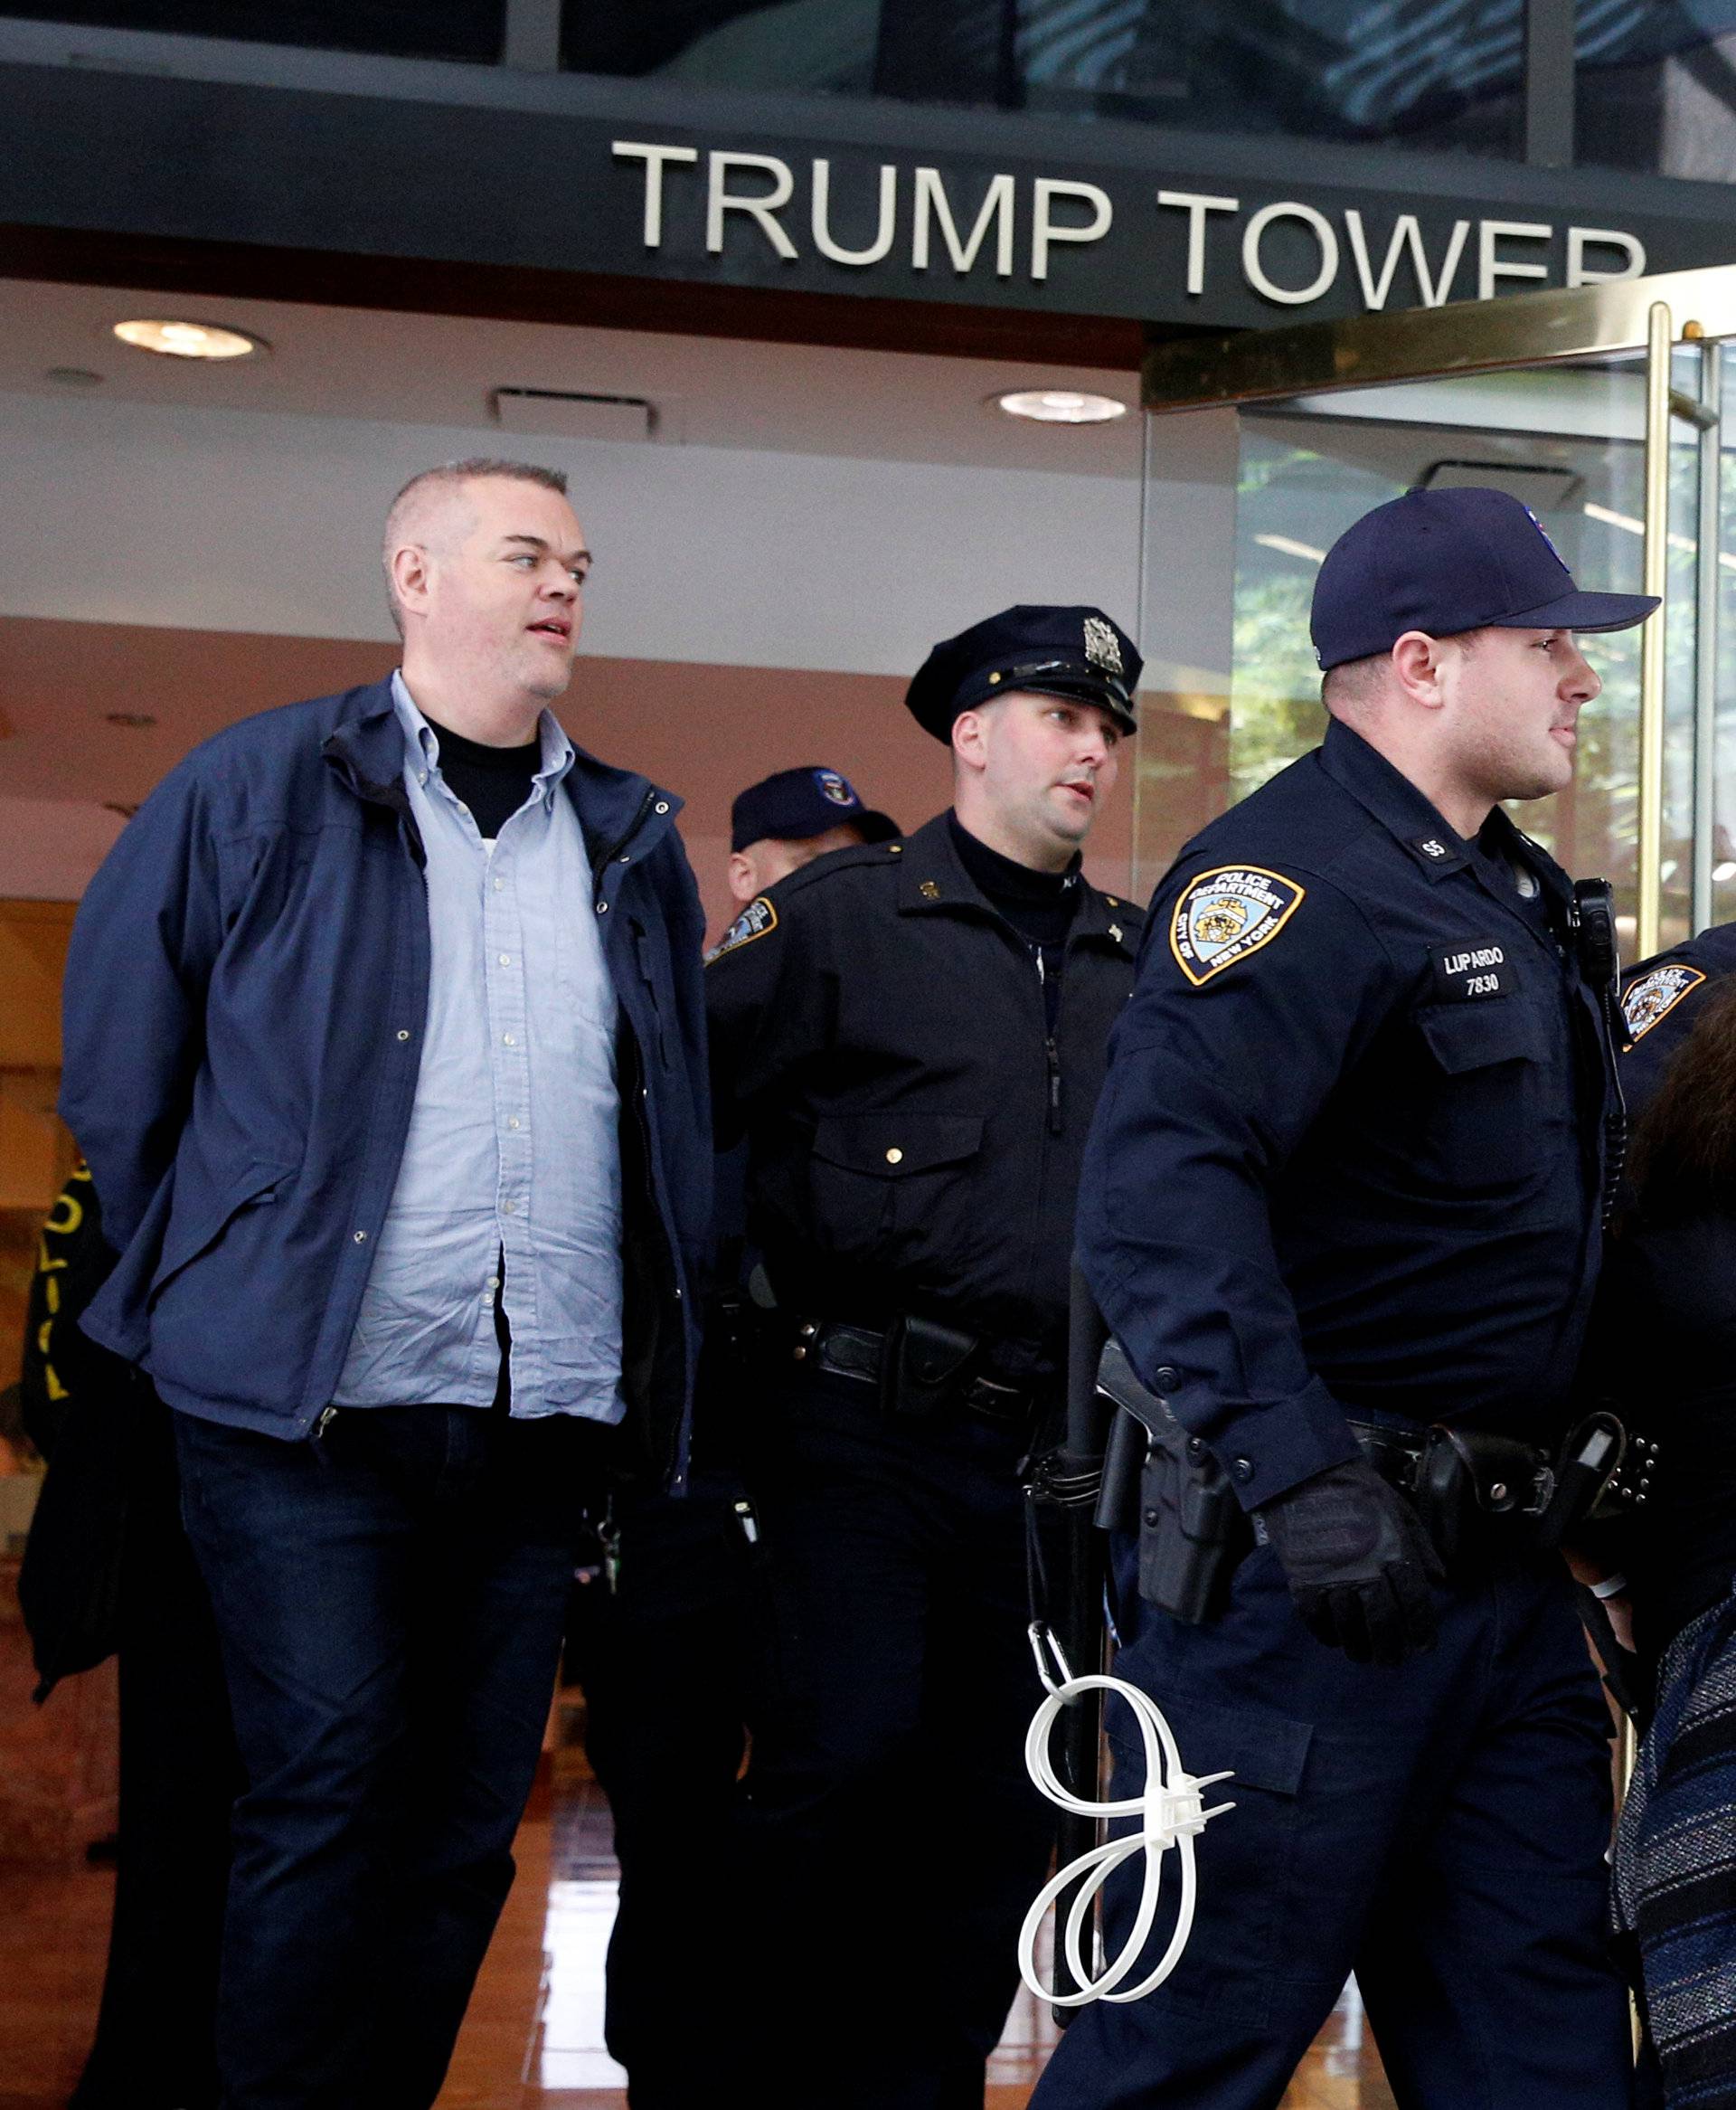 New York City Police officers (NYPD) carry and escorts protestors after making arrests for demonstrating in Trump Tower in New York City